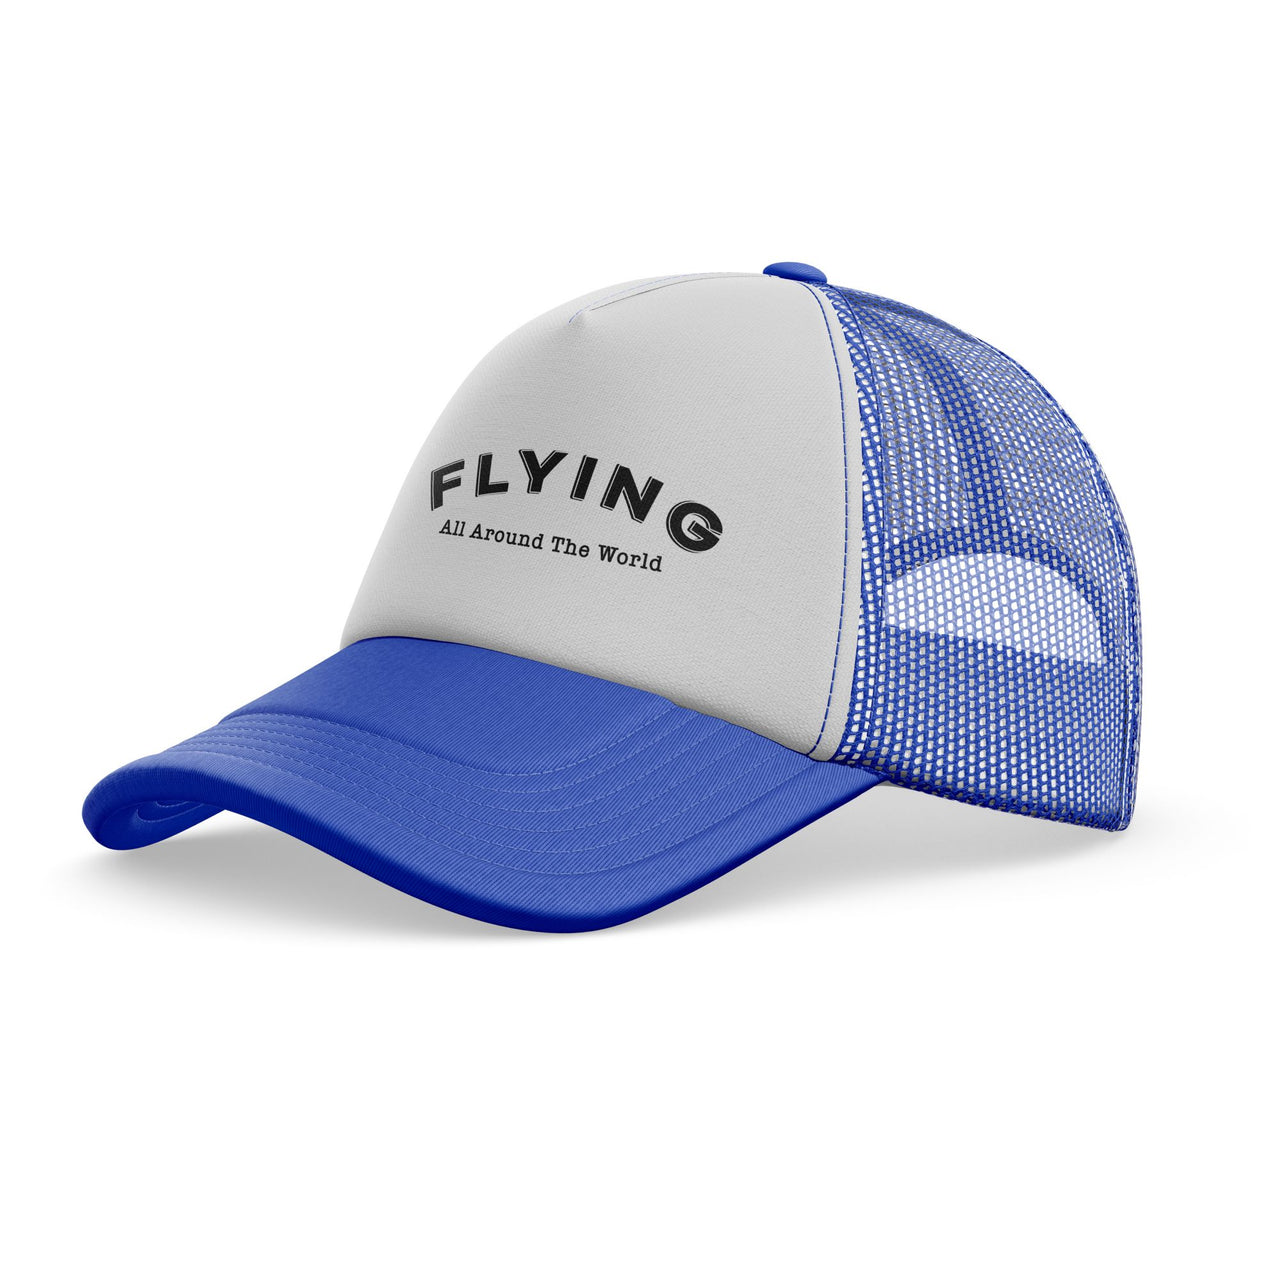 Flying All Around The World Designed Trucker Caps & Hats